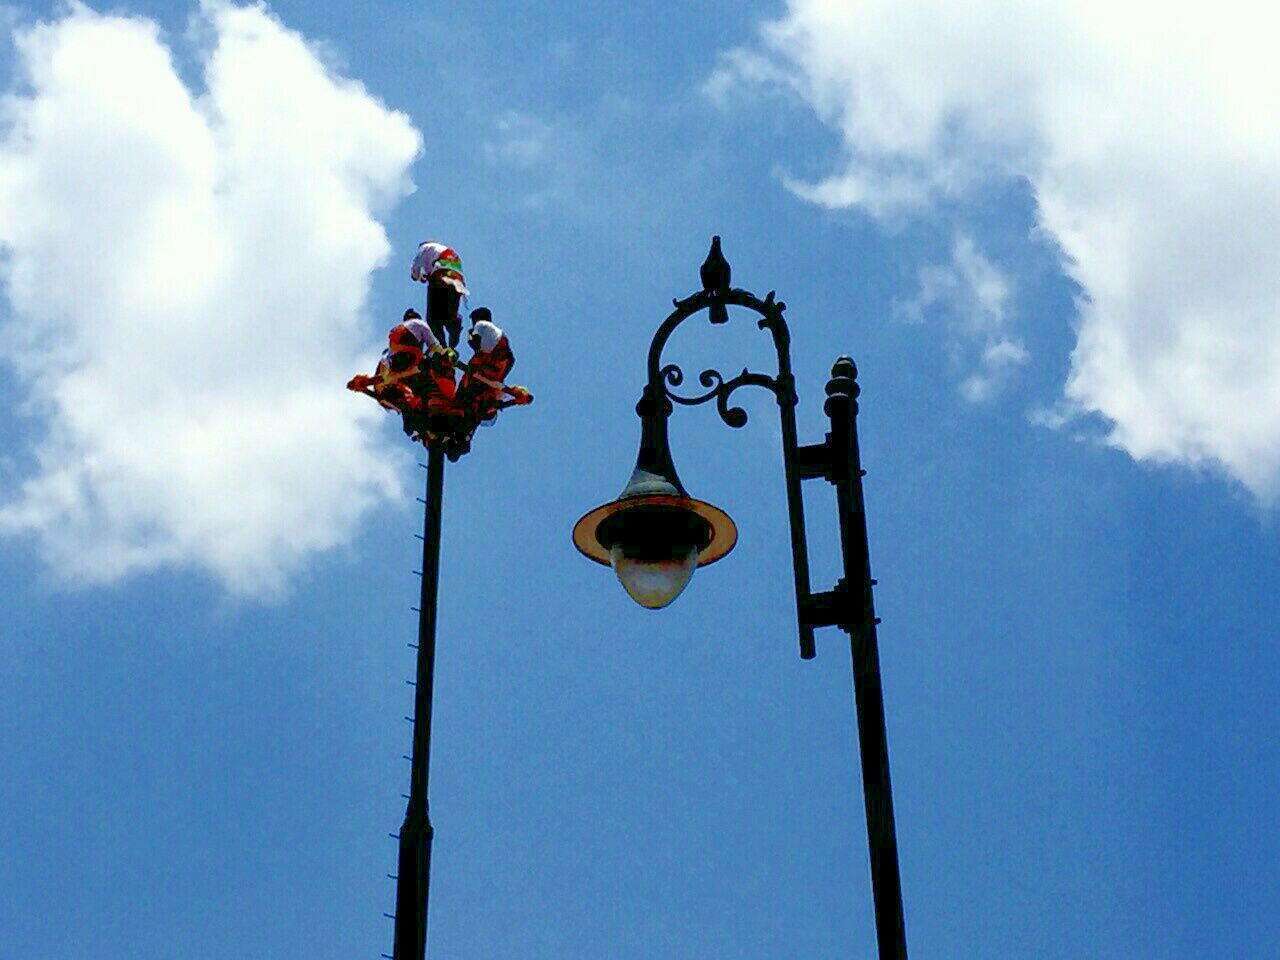 low angle view, sky, lighting equipment, street light, cloud - sky, hanging, cloud, pole, blue, no people, religion, day, cloudy, lantern, spirituality, outdoors, high section, lamp post, human representation, communication